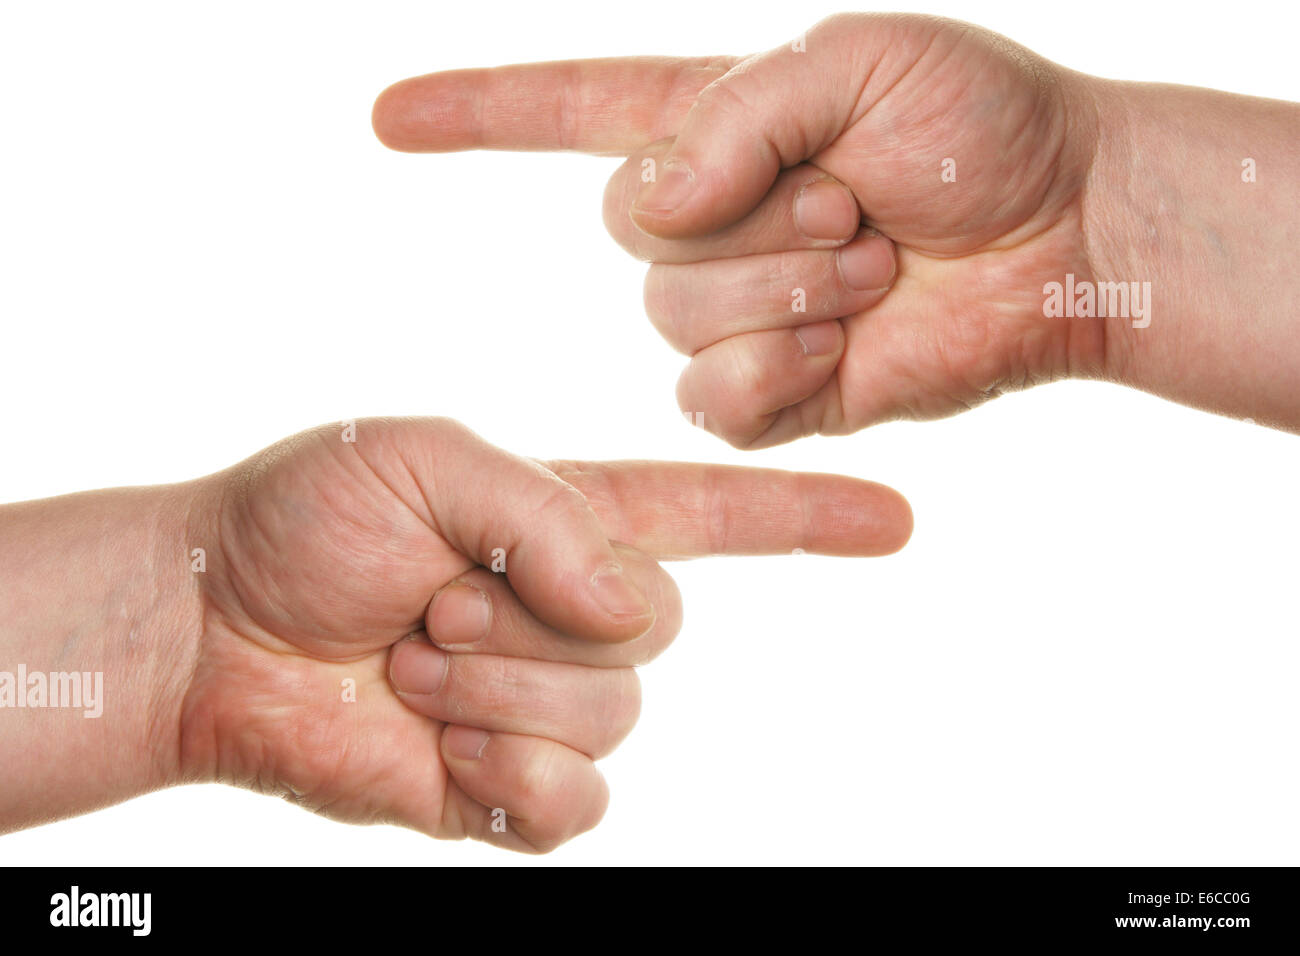 Pointing human hands isolated over white background Stock Photo